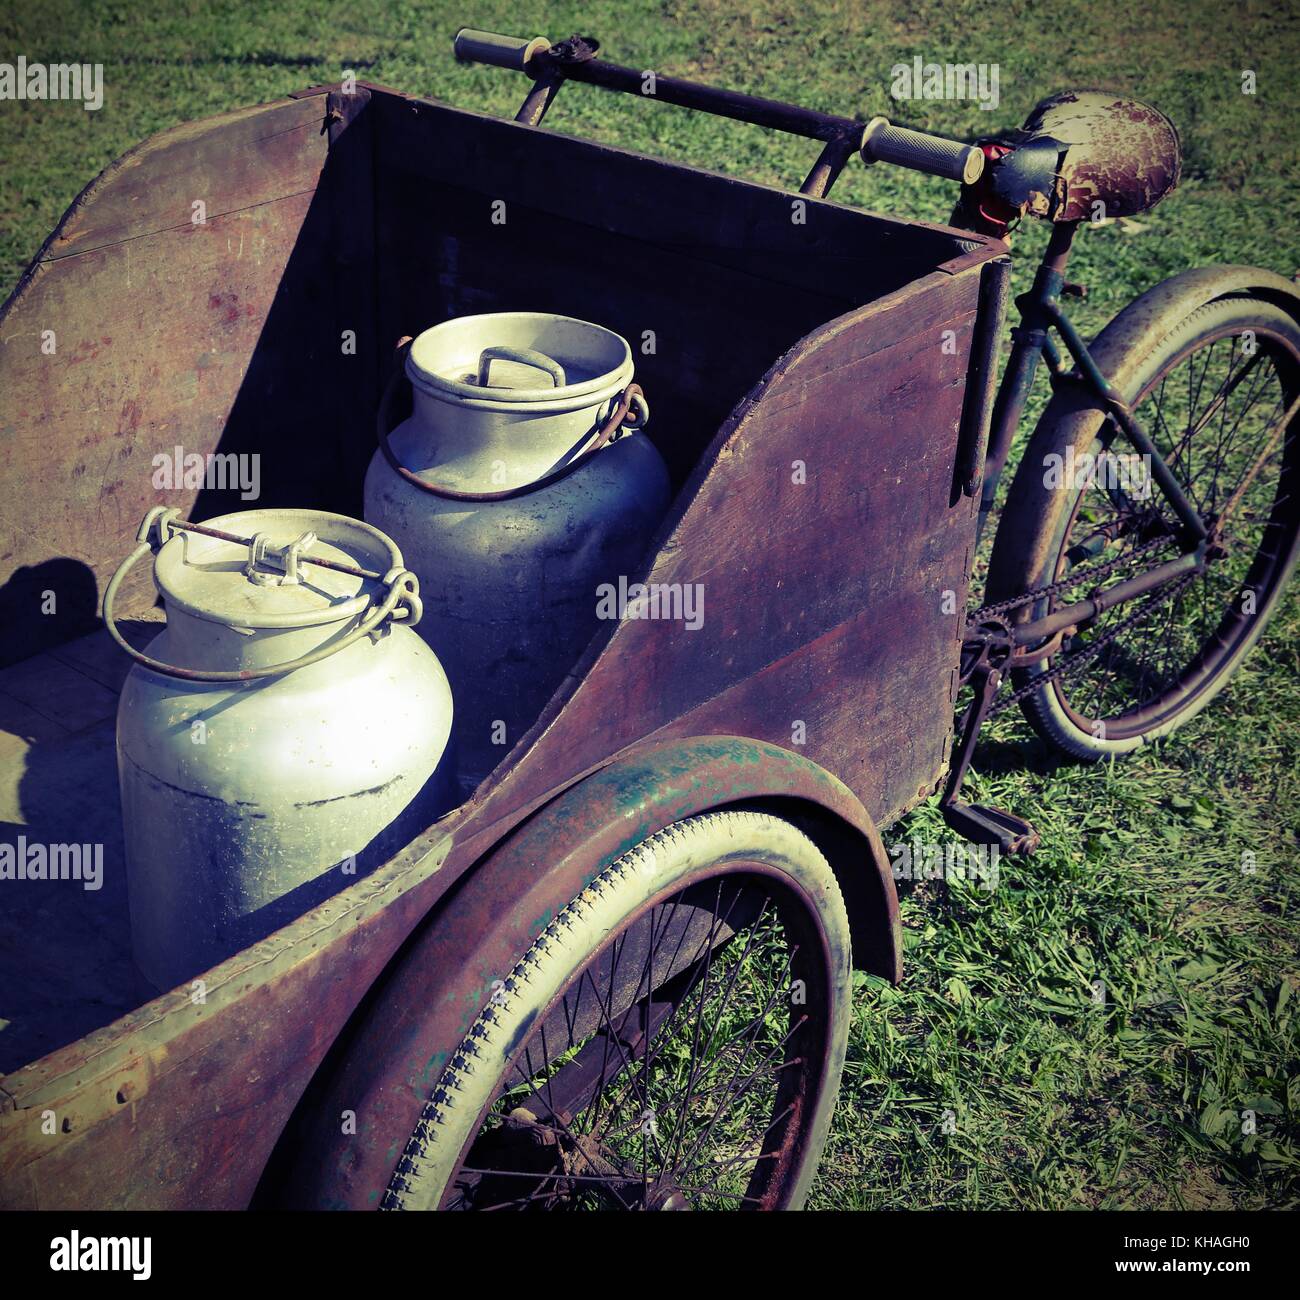 two old milk cans transported by an old wagon with vintage bicycle Stock Photo